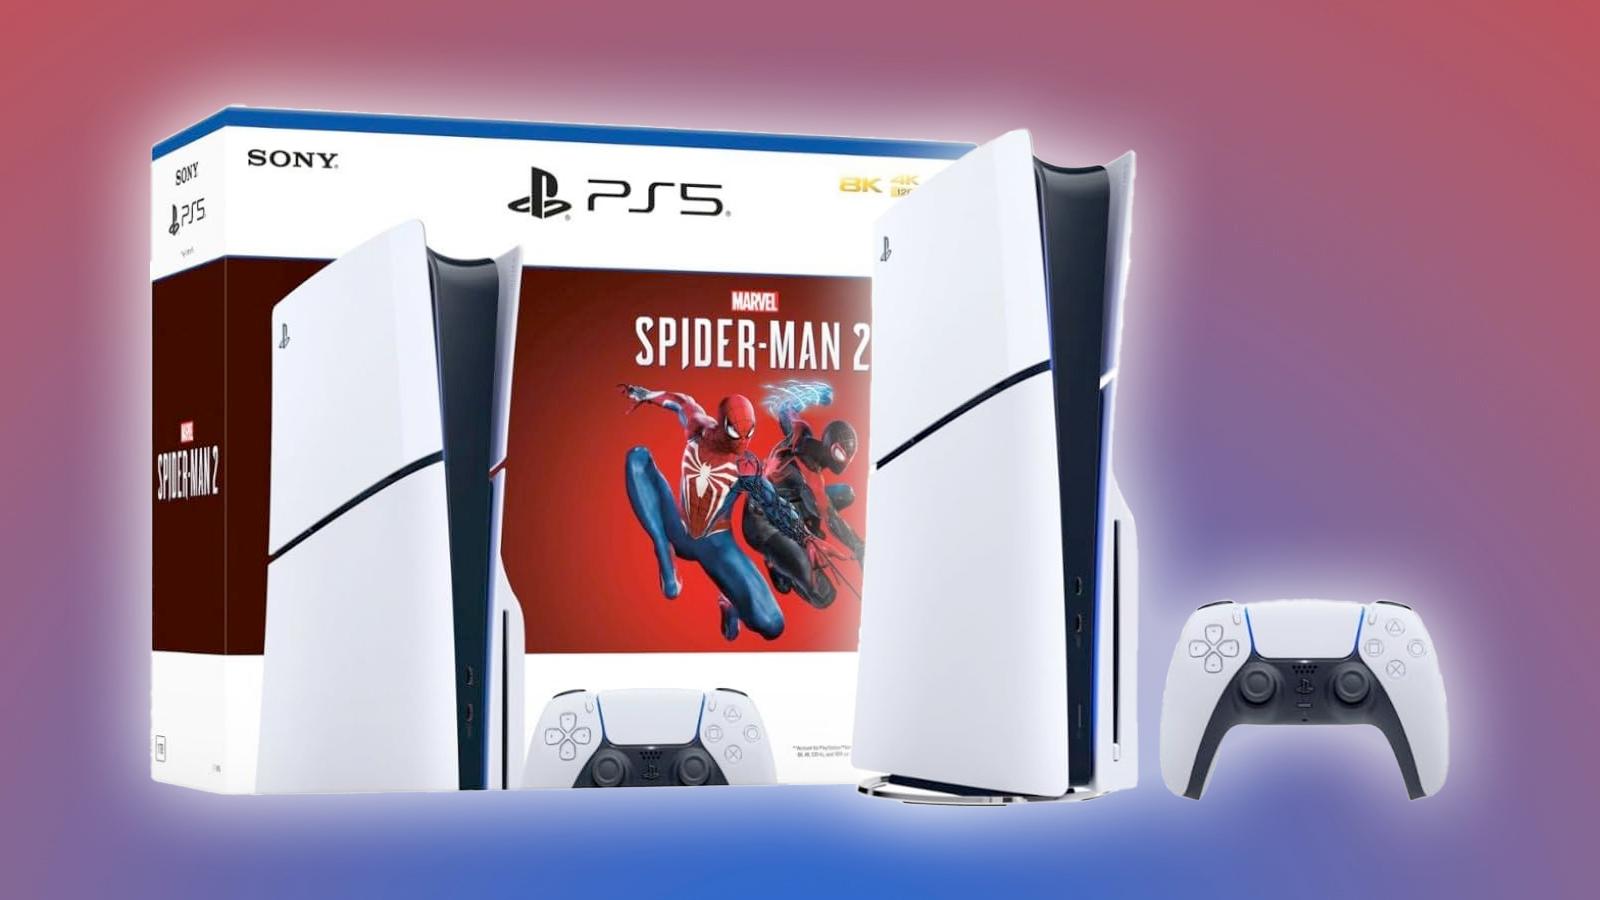 ps5 slim console with spider-man 2